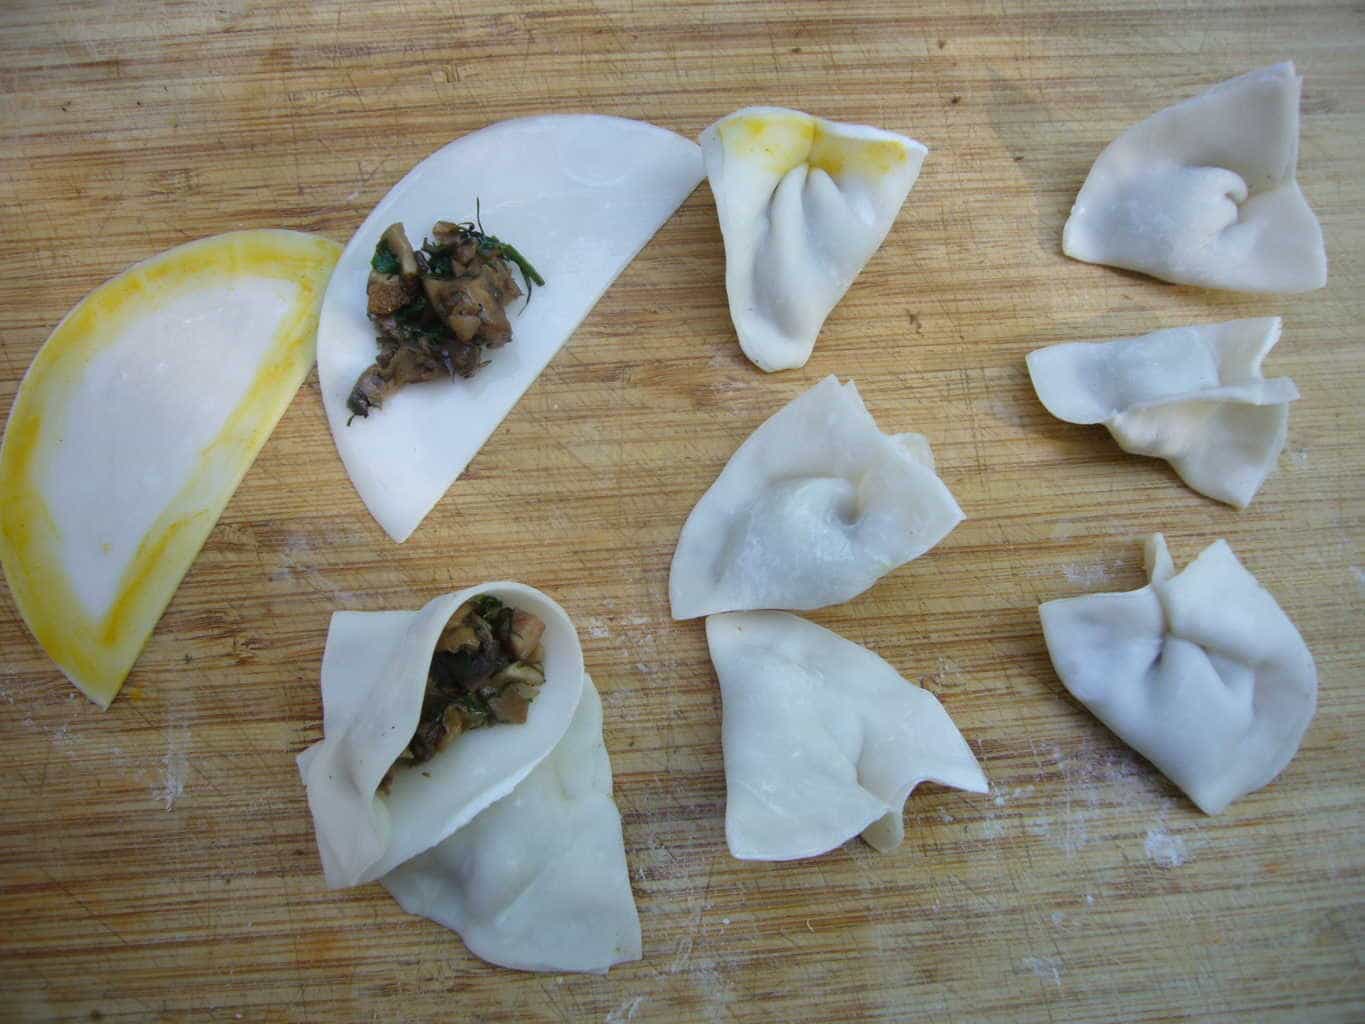 Dumpling wrappers being filled with mushroom filling.